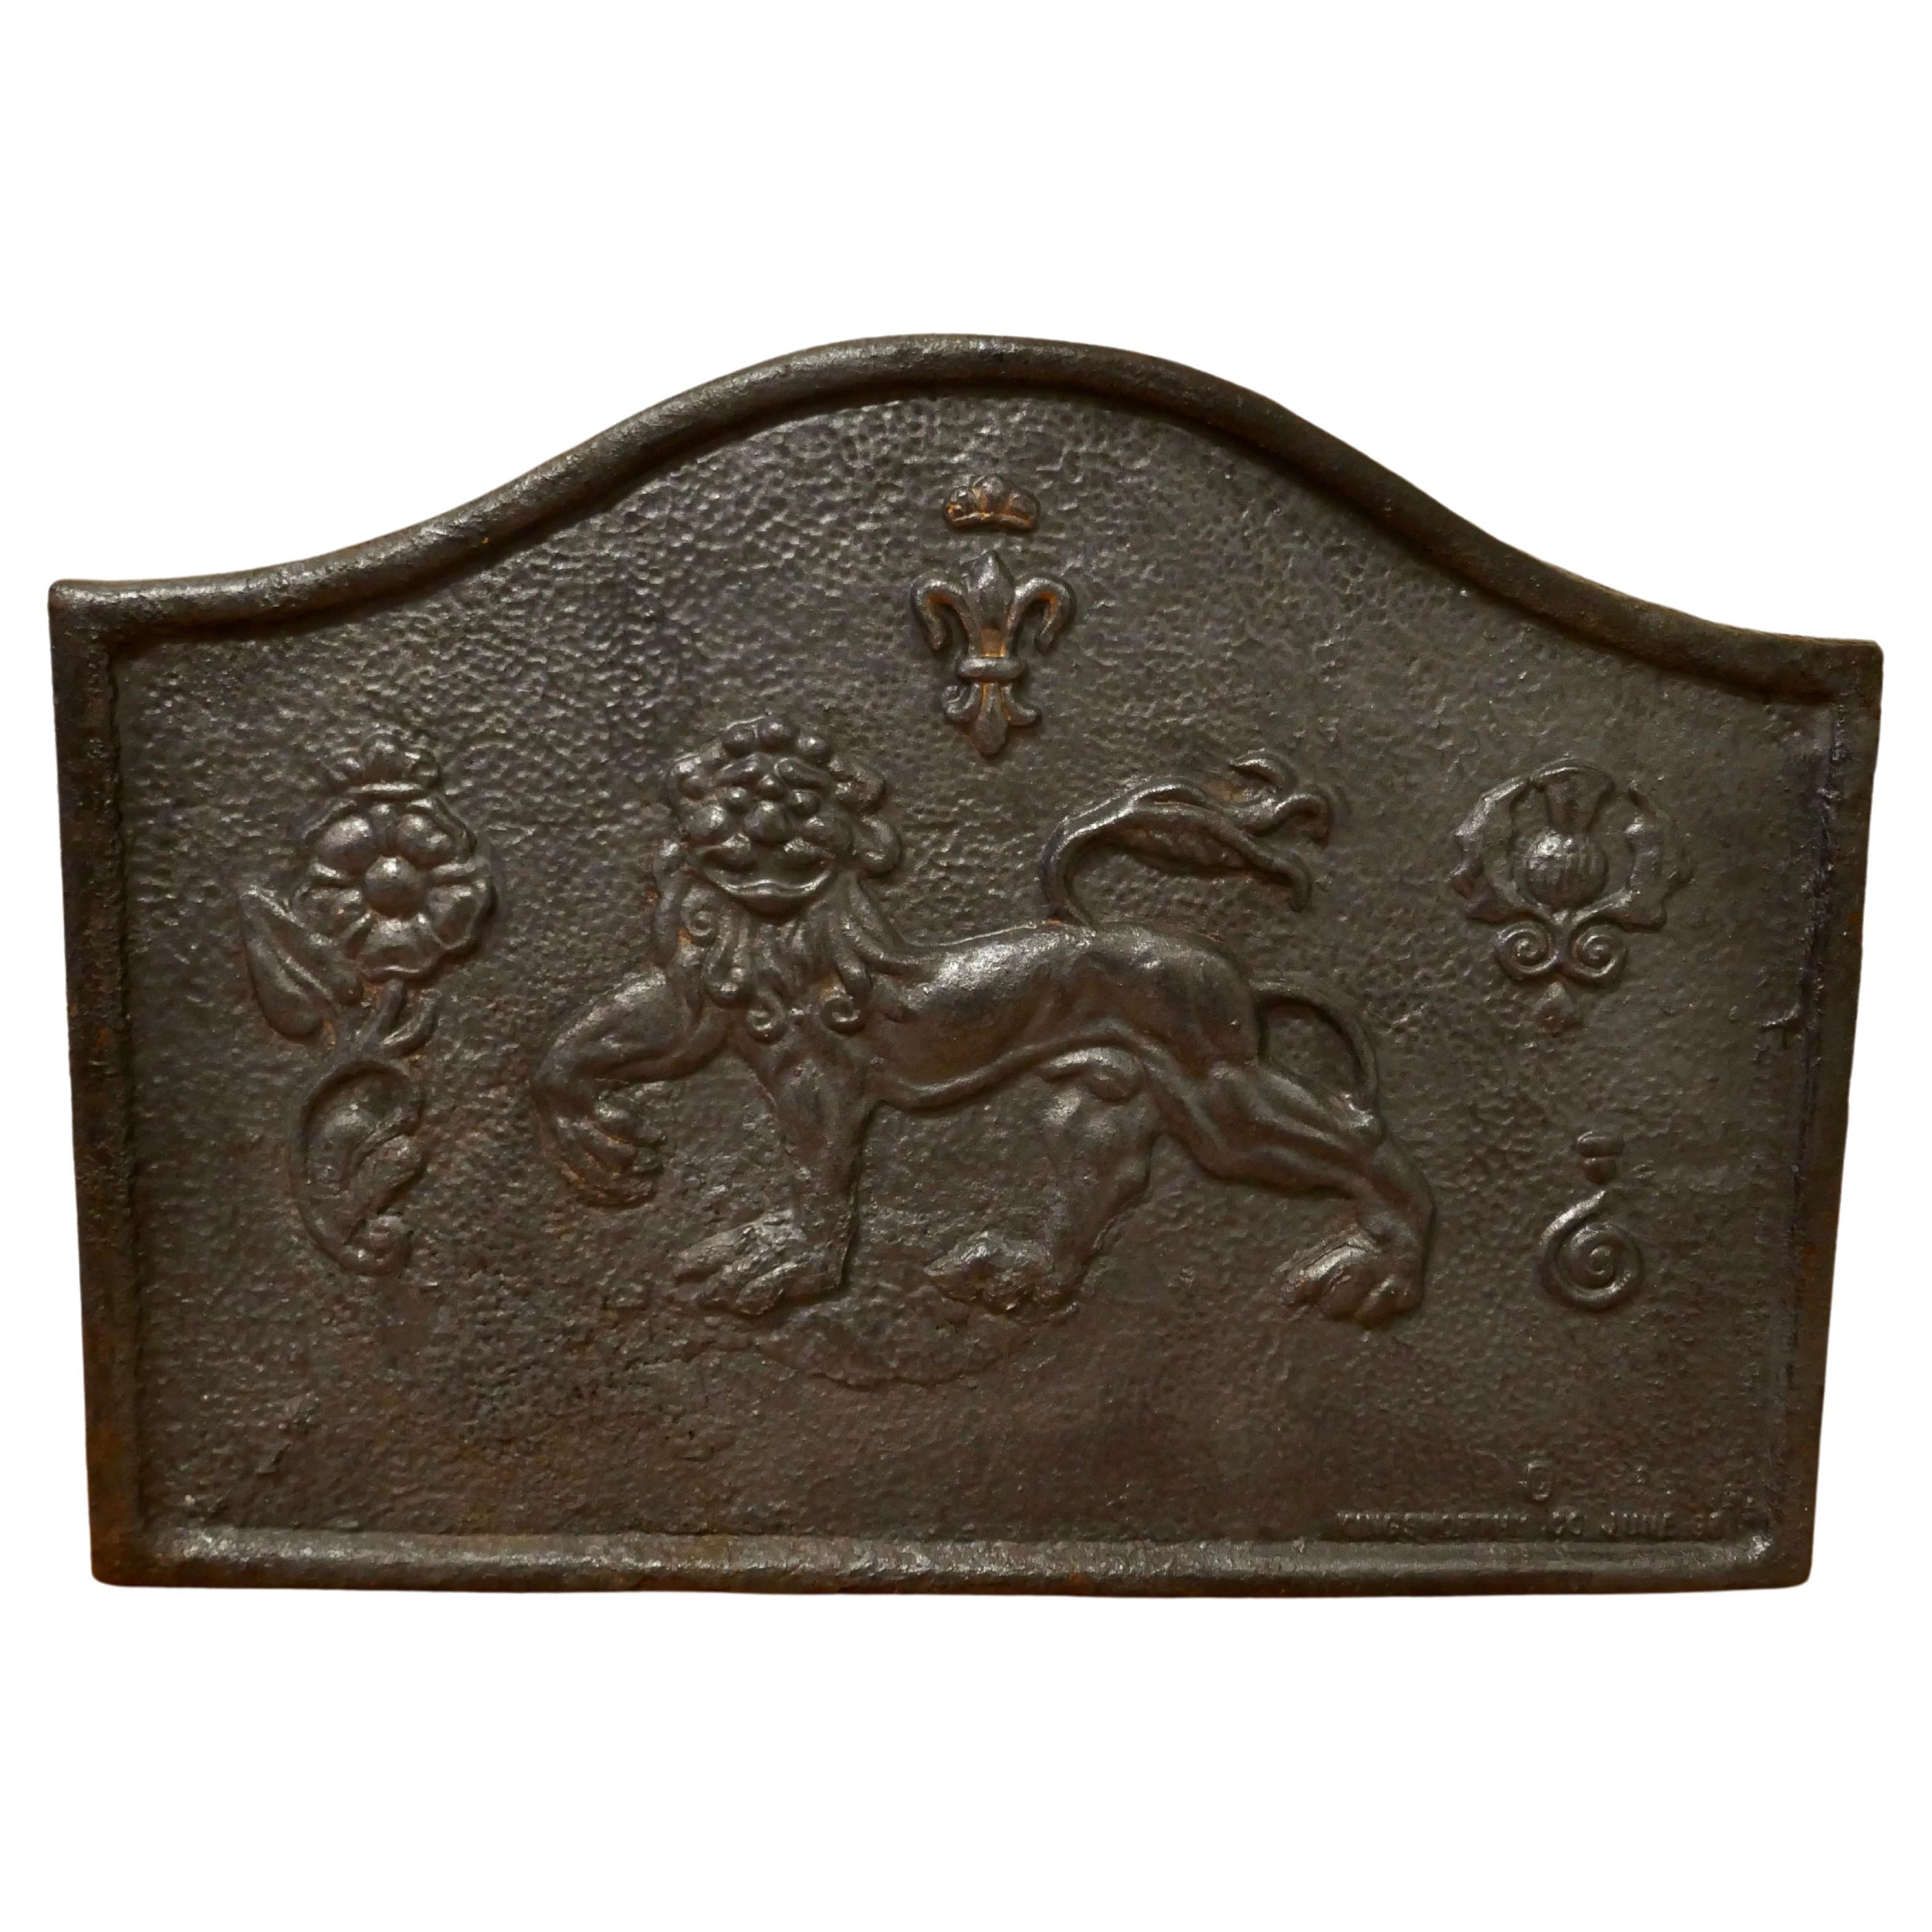 Cast Iron Fire Back, by the Kingsworthy Foundry